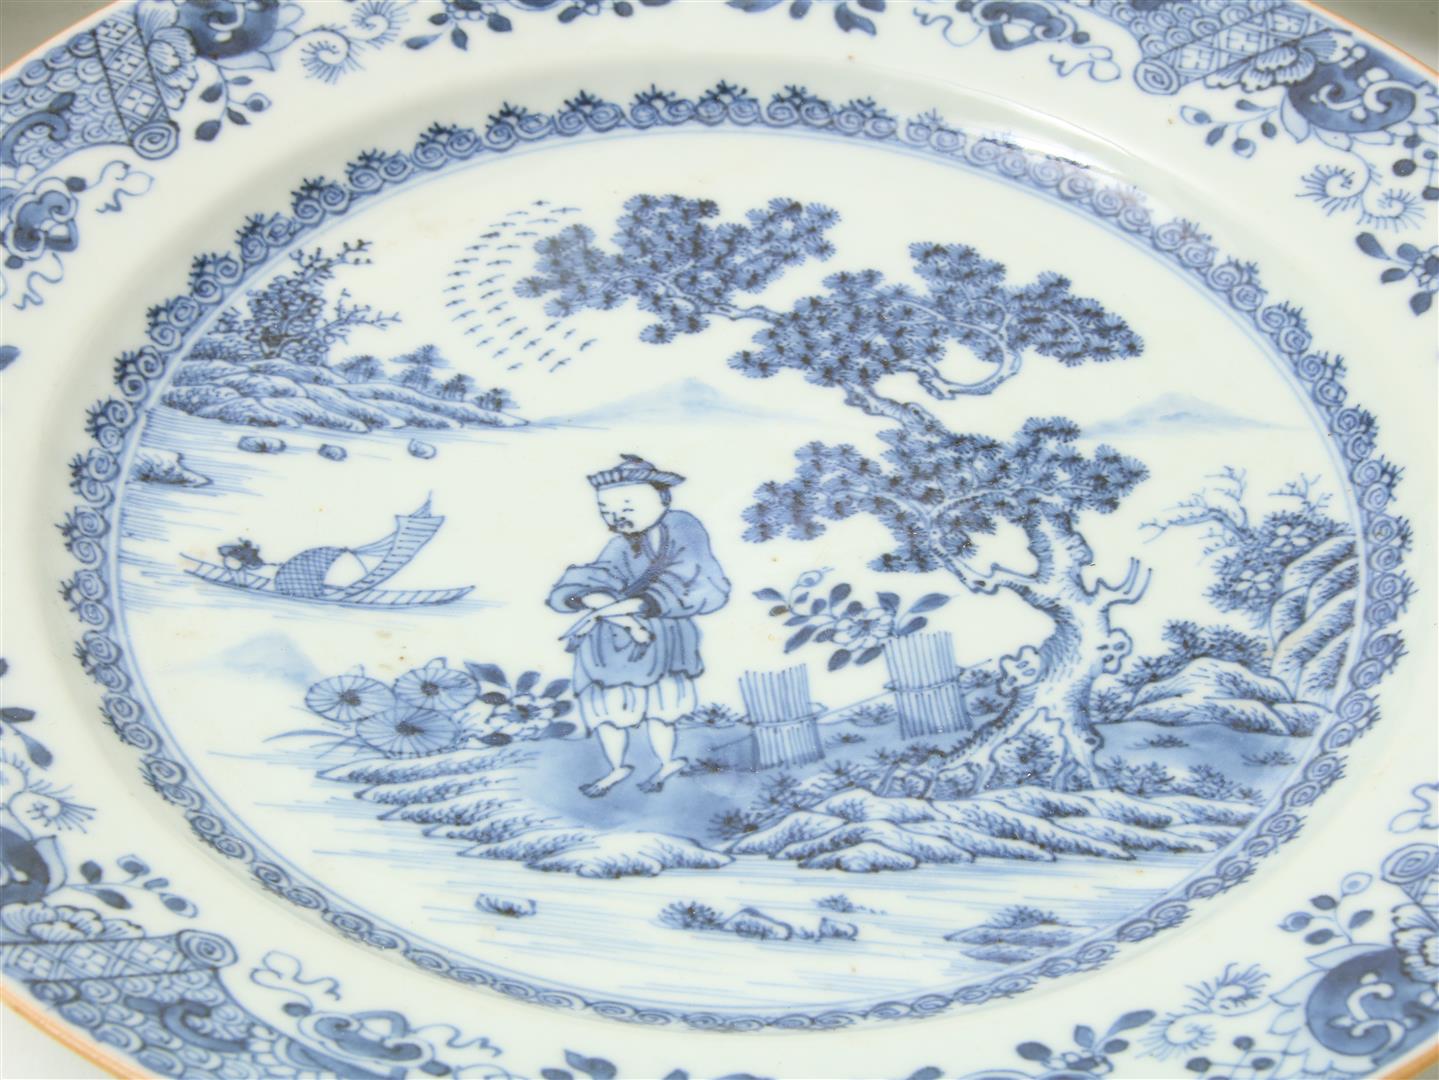 A set of 3 porcelain dishes decorated with a figure next to river, China 18th century, Qianlong, - Image 5 of 6